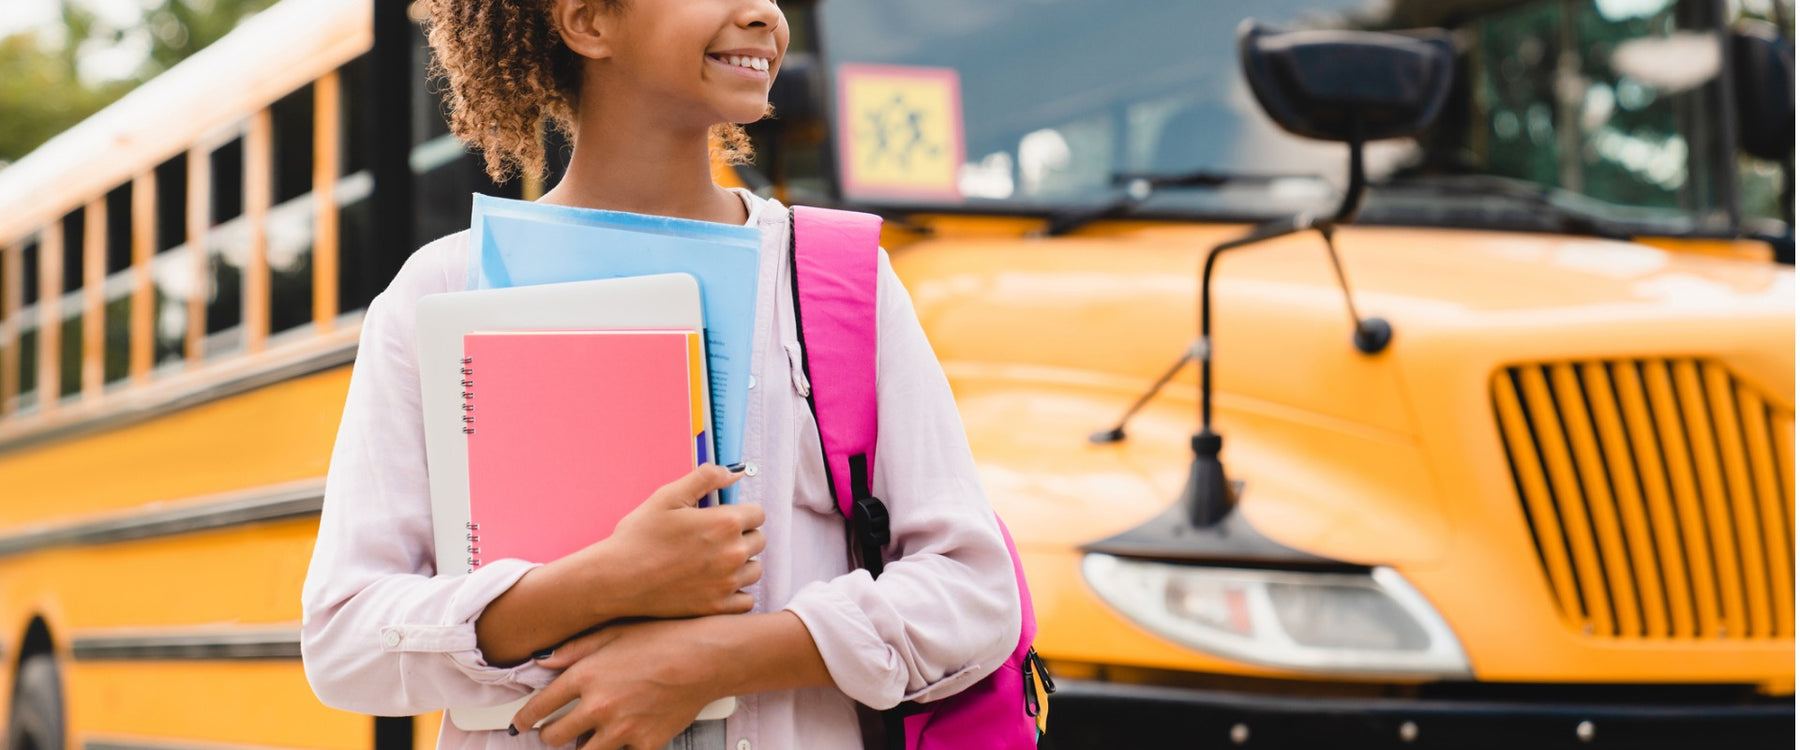 Buying School Supplies in Bulk is Convenient & Affordable for Every Family